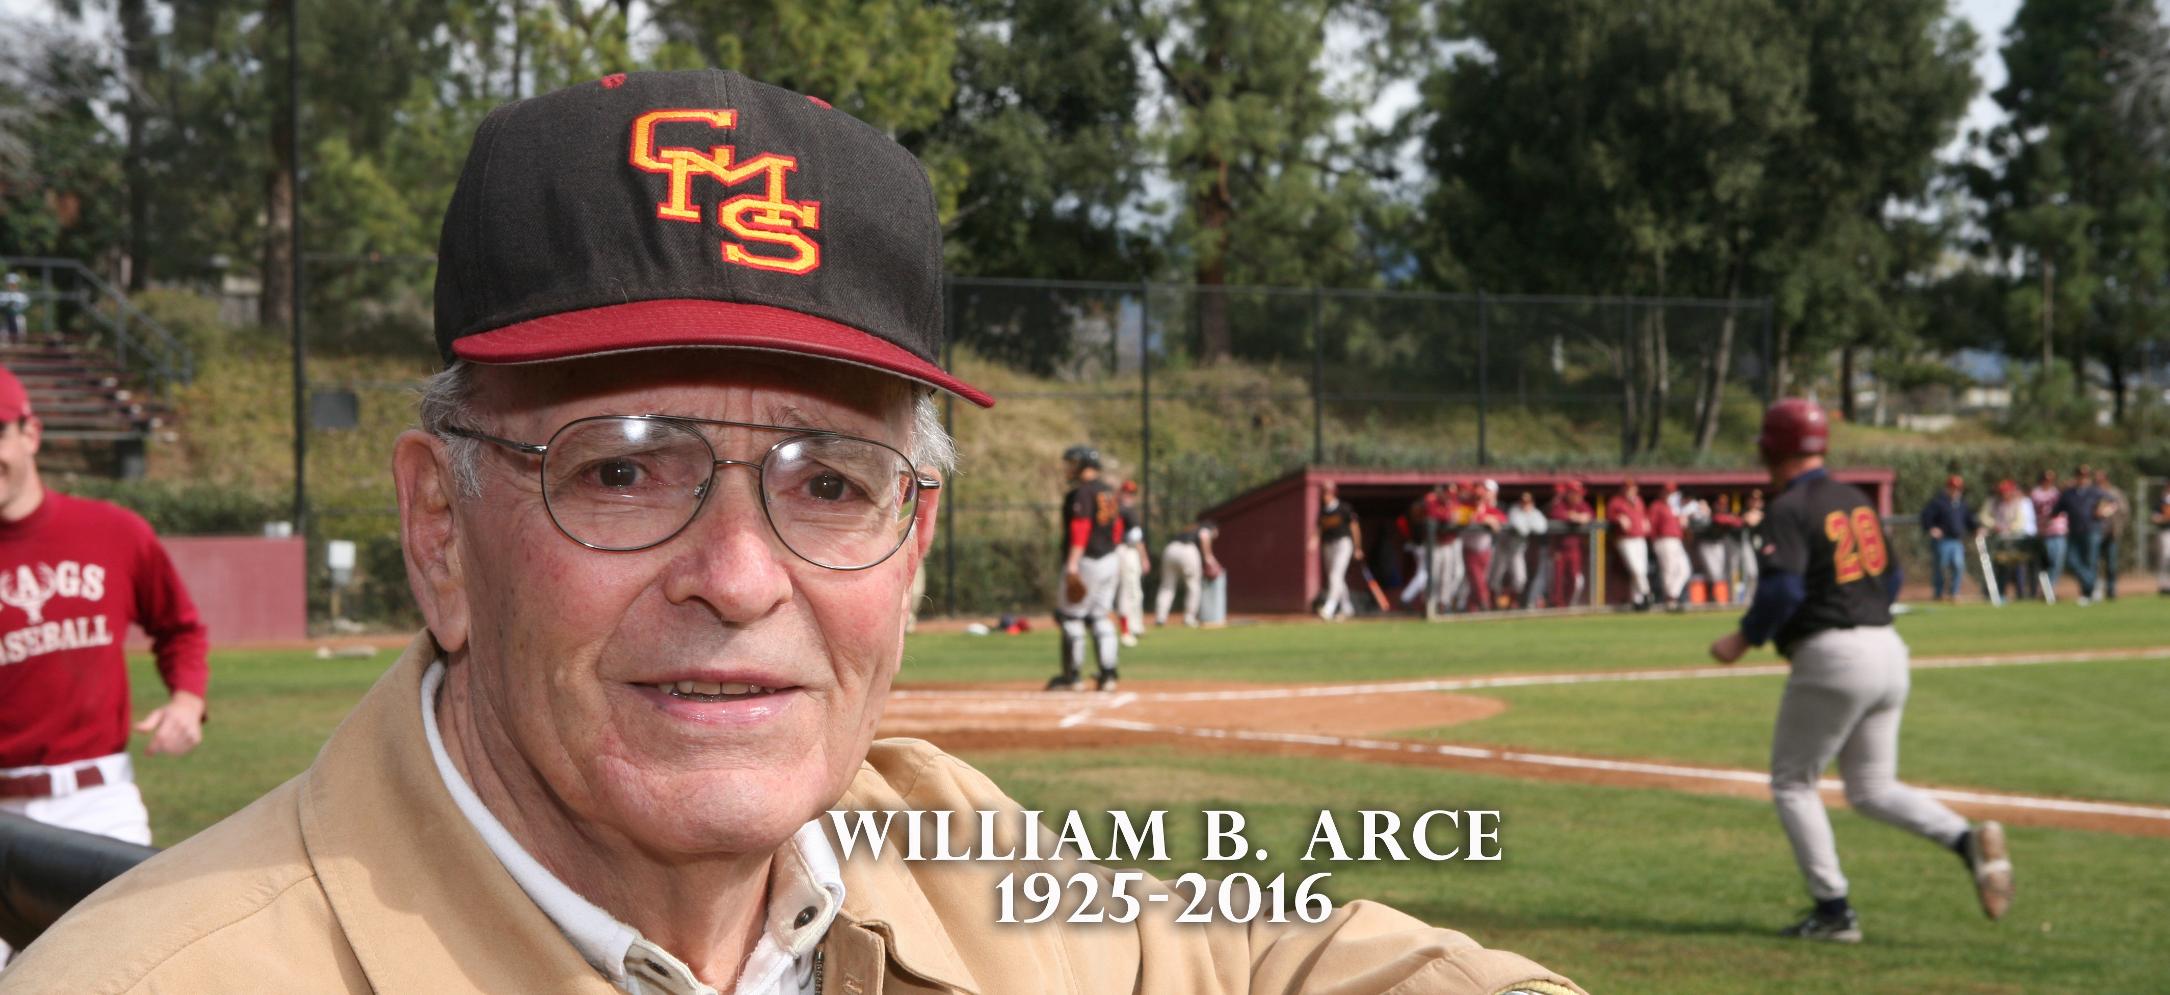 Information for May 1 Coach Arce Memorial Service